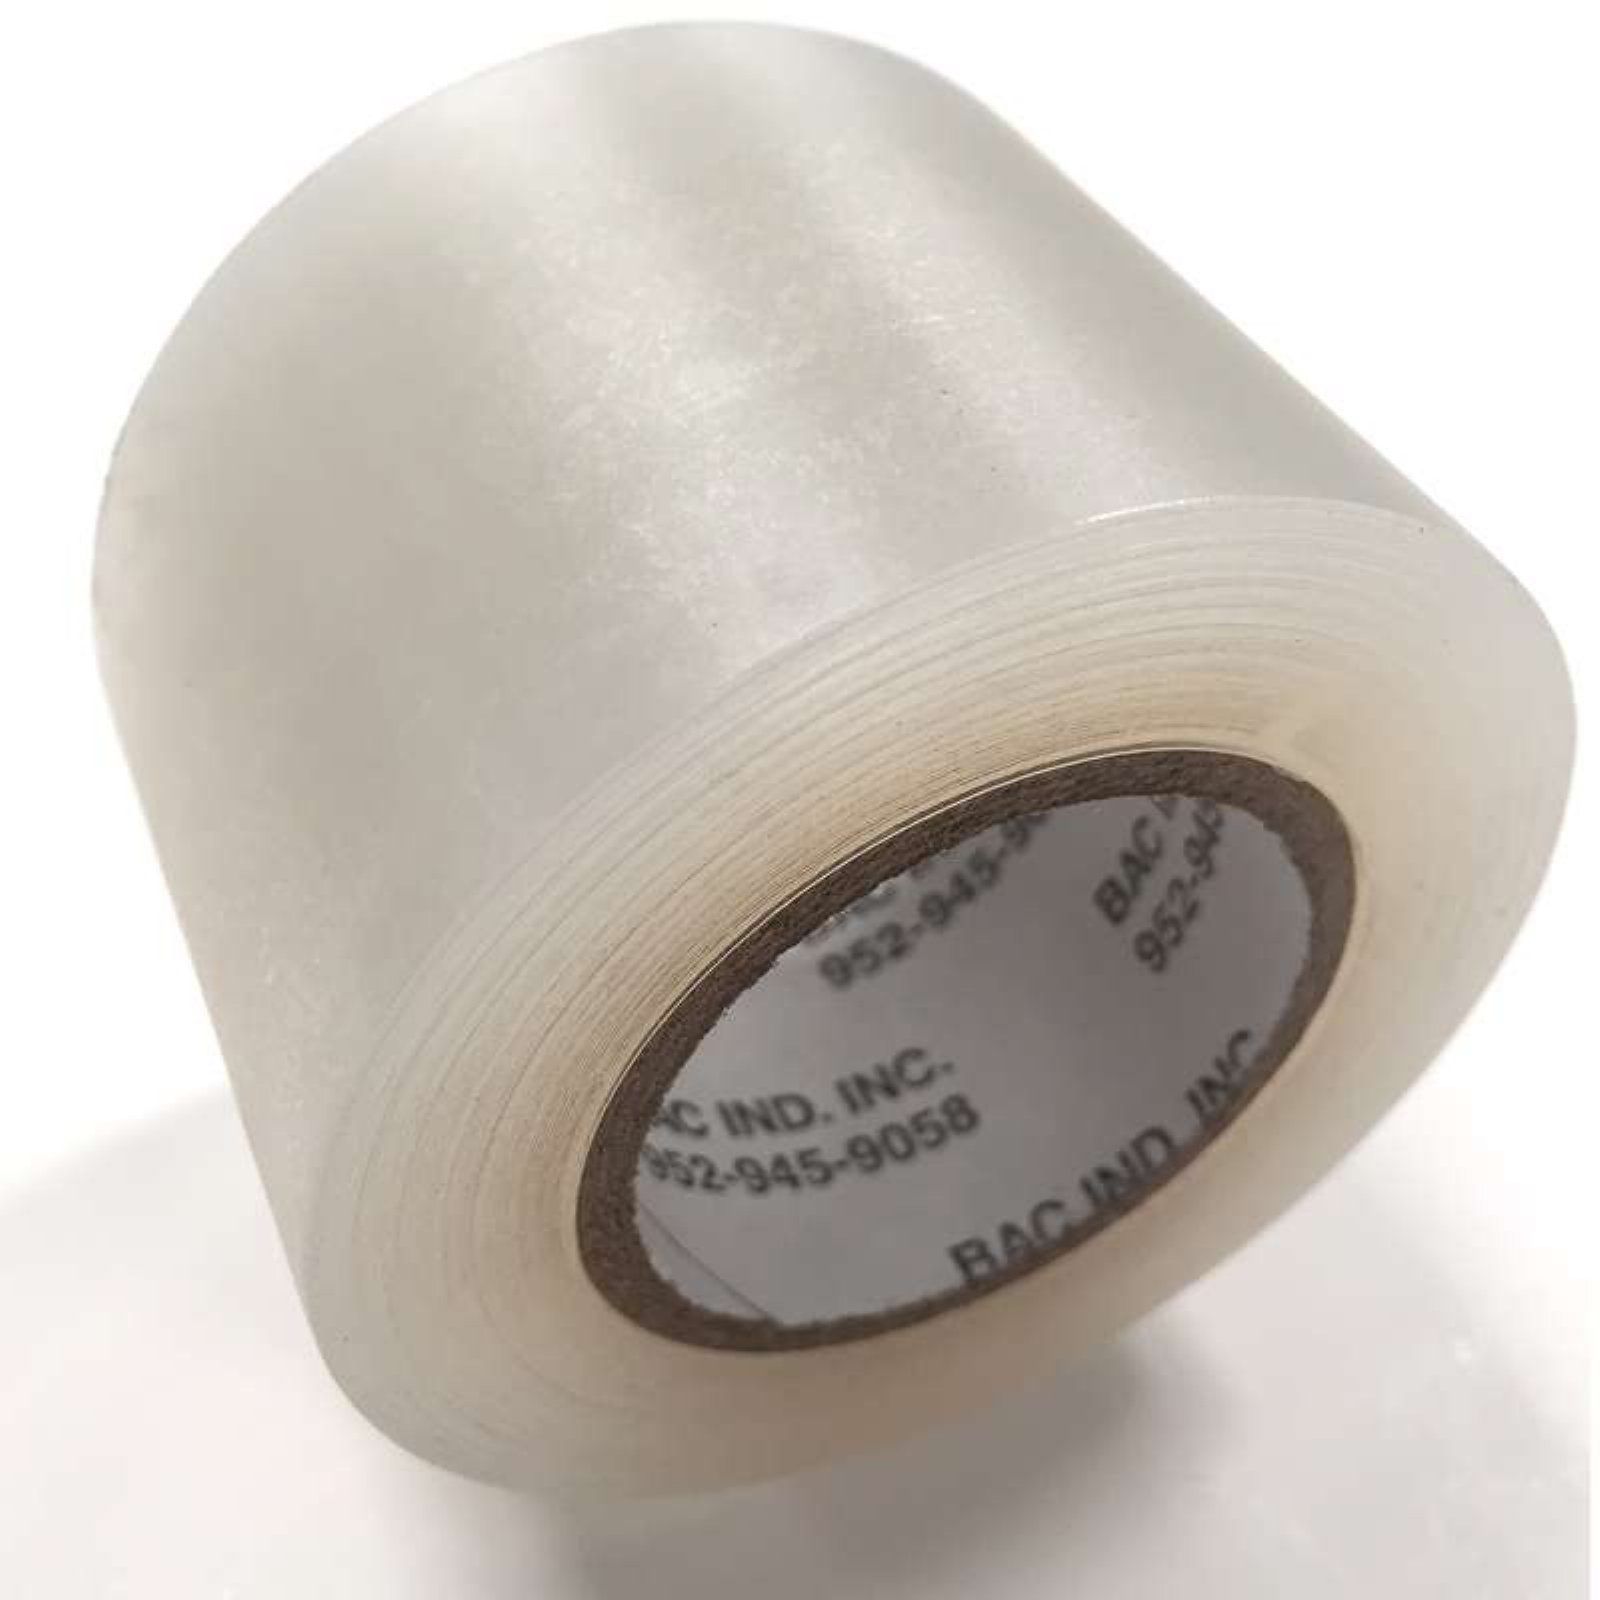 King Canopy Tarp Tape Large Black - 3 inch x 108 ft Roll - image 3 of 4